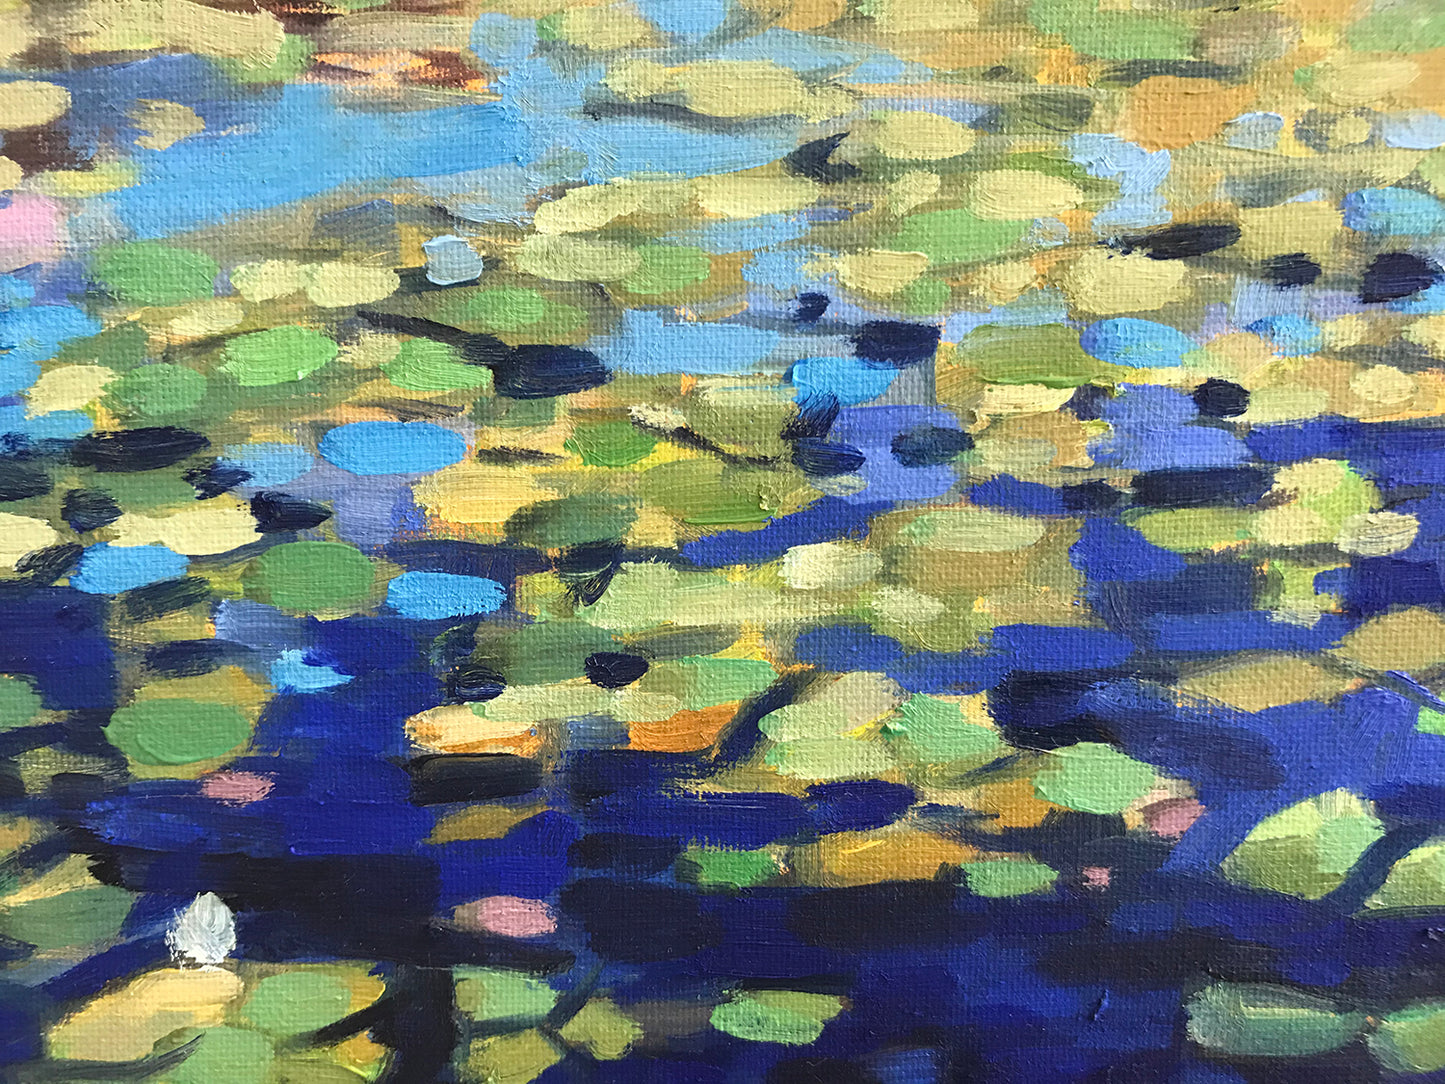 Morning Lily Pads, 20x16 inches